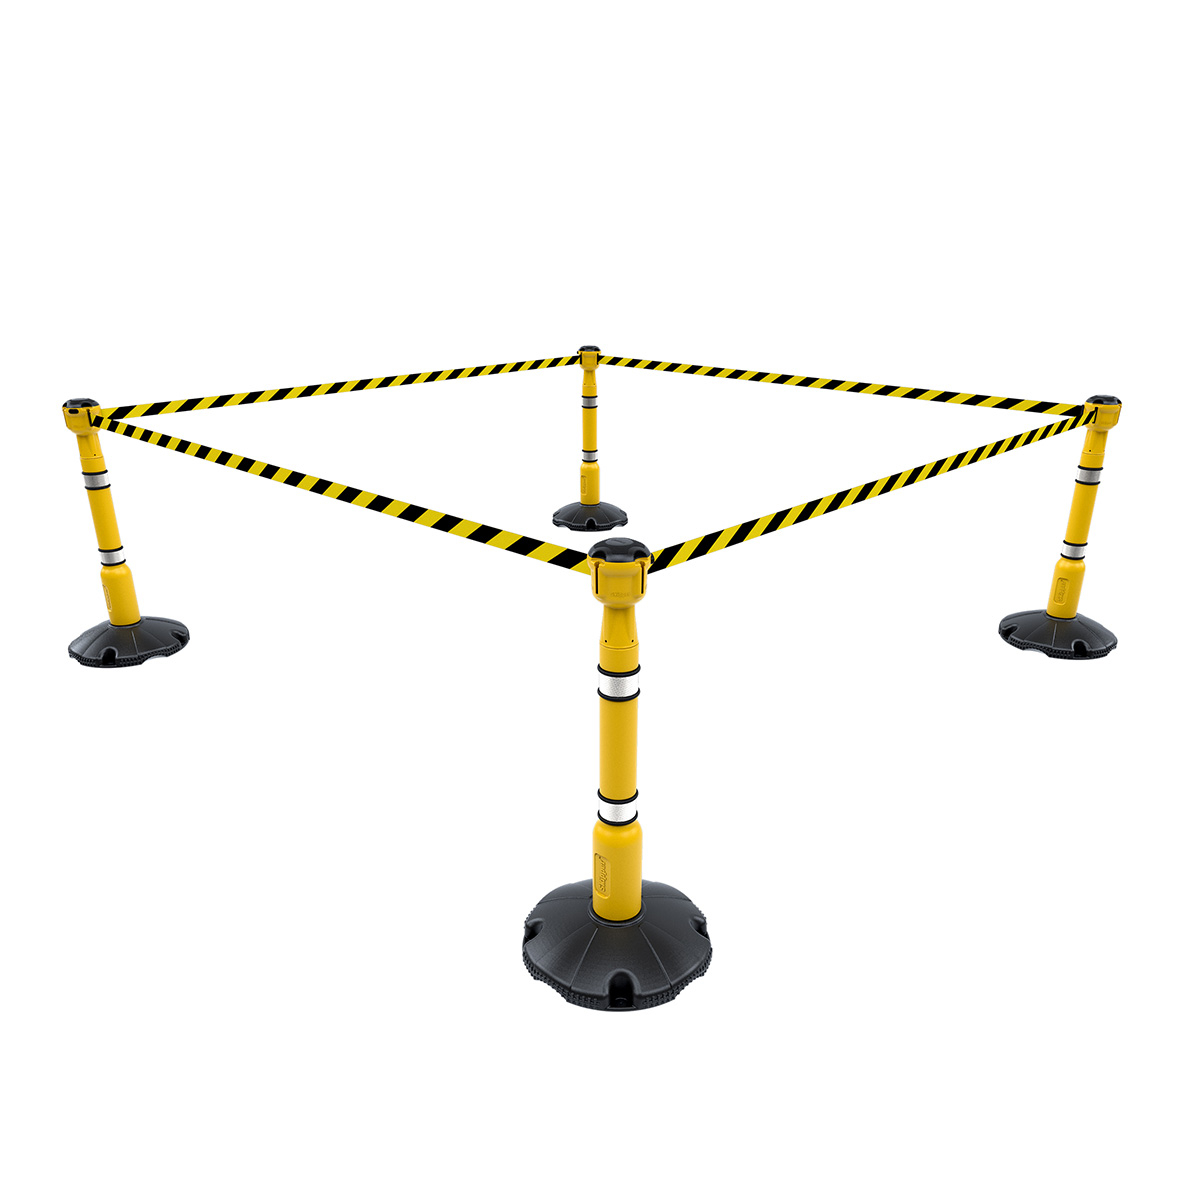 Skipper Barrier Systems 36m With Yellow Posts And Yellow/Black Chevron Webbing